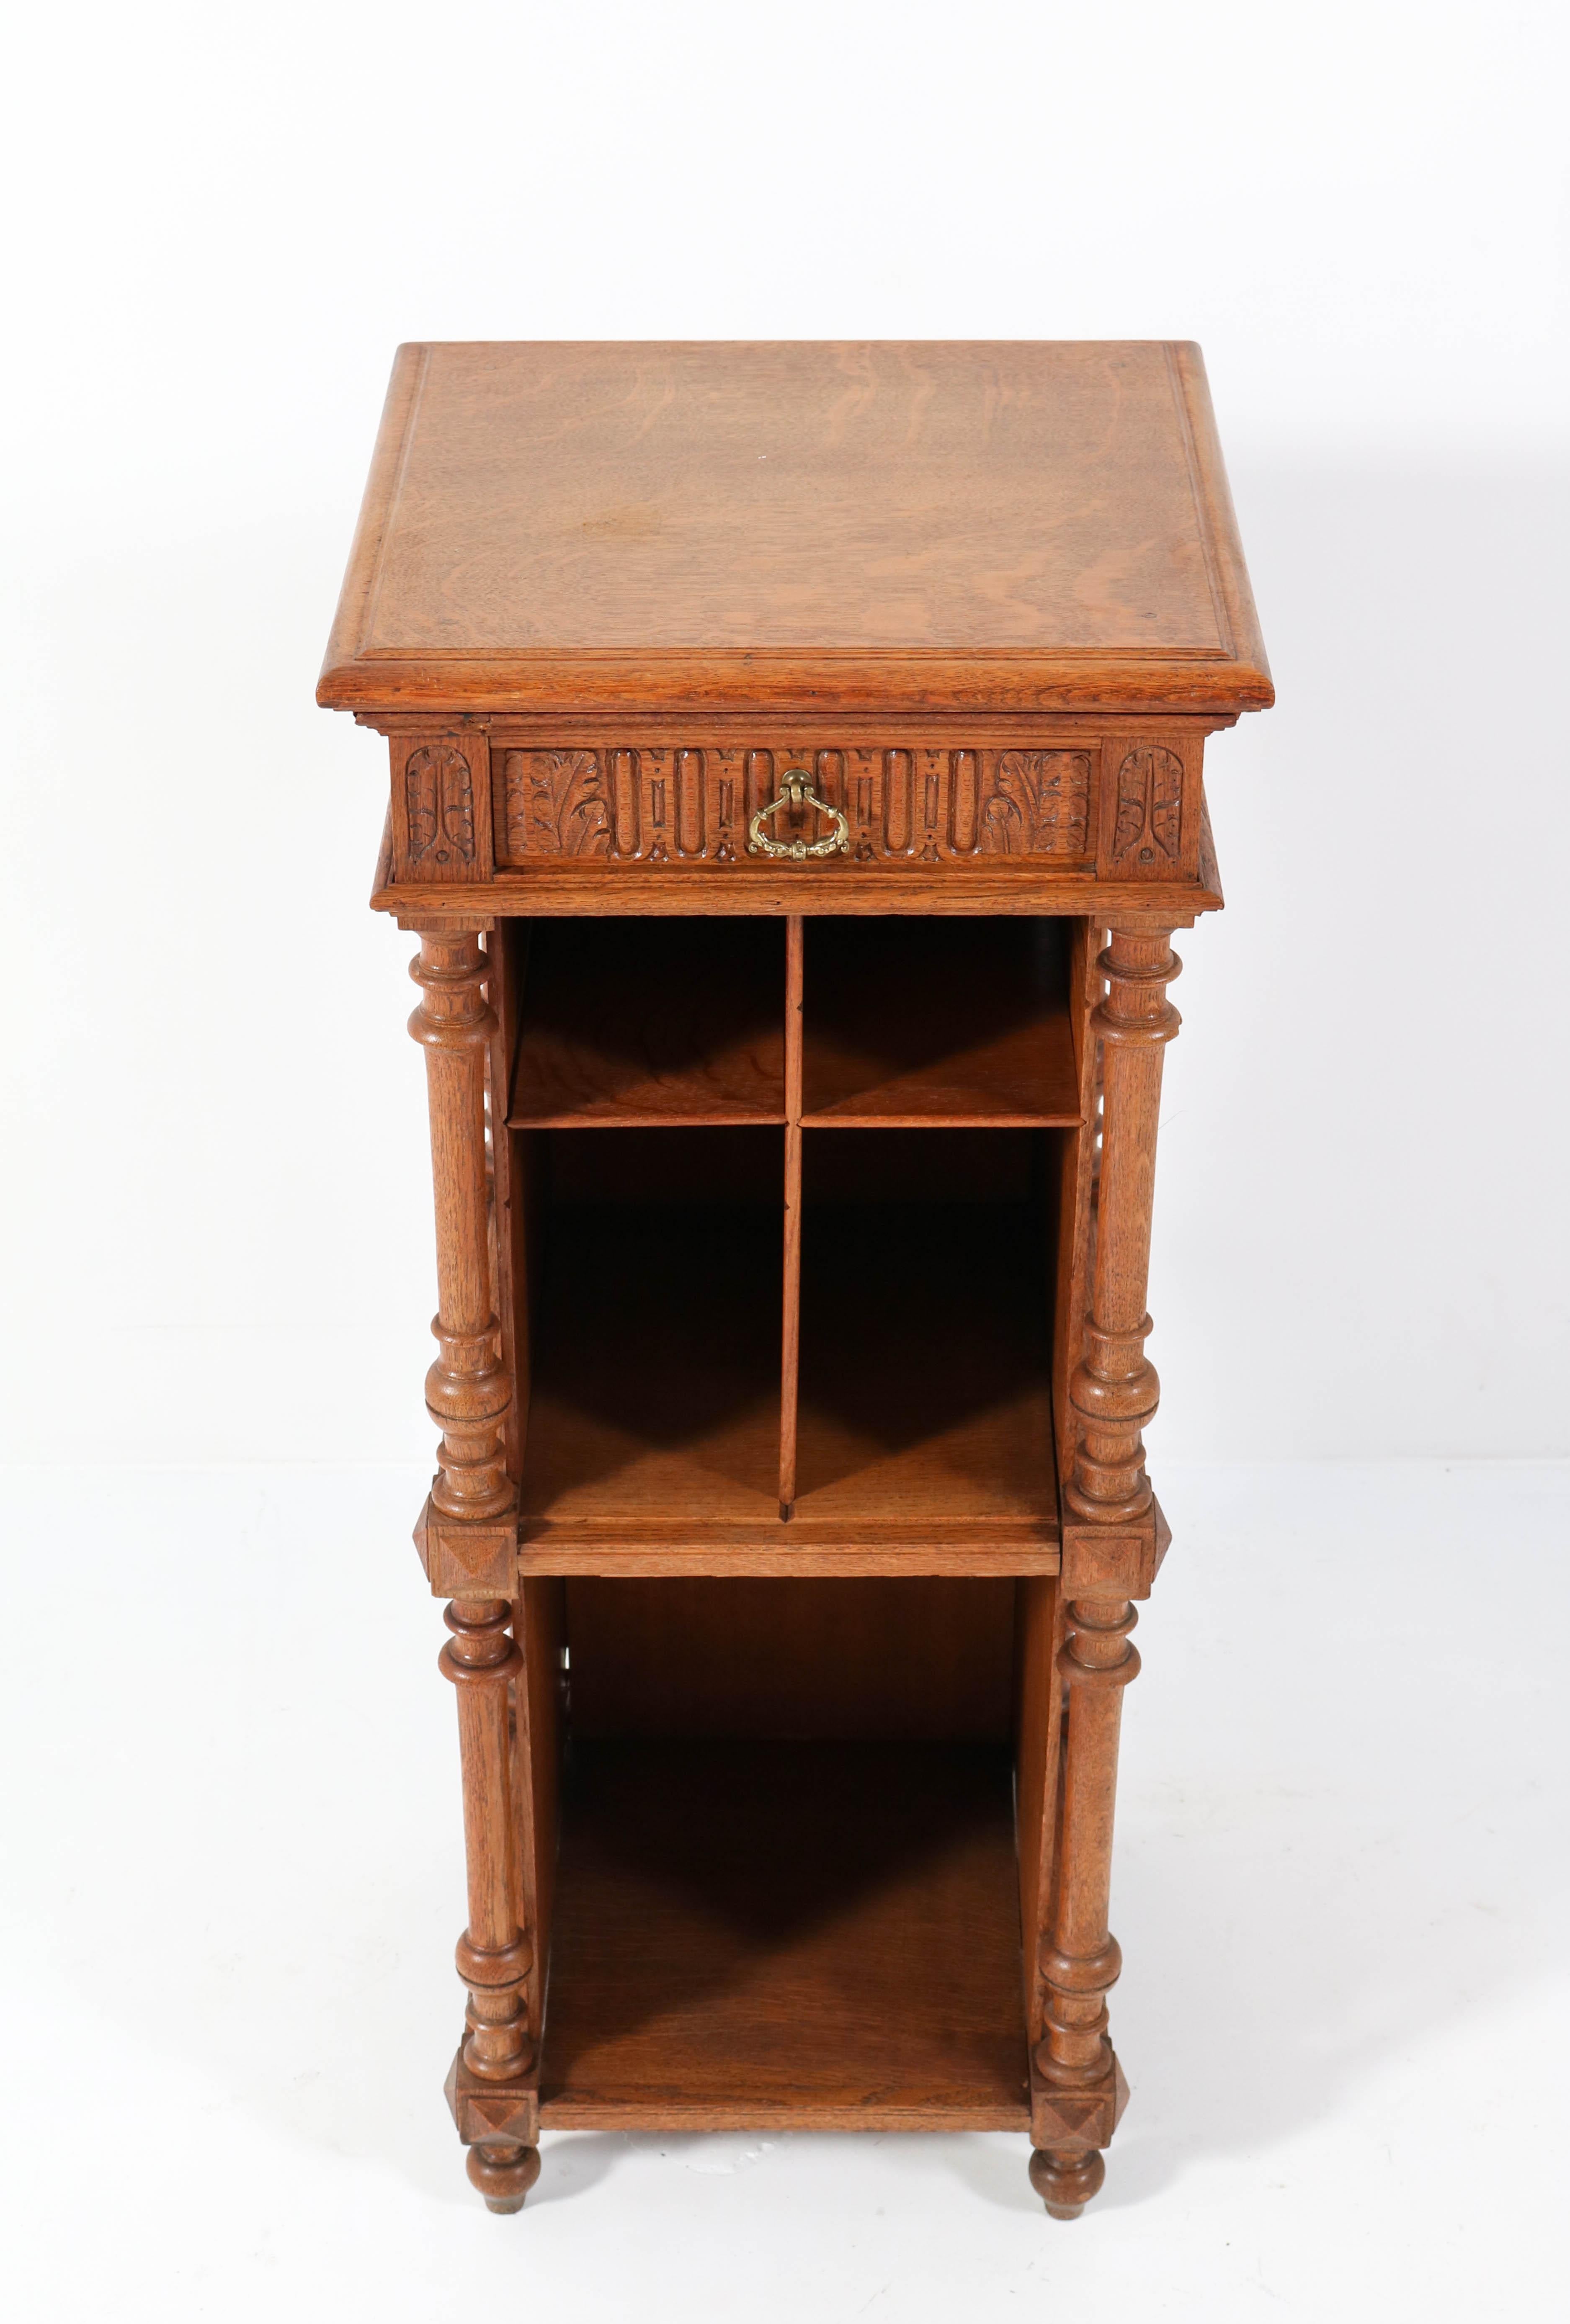 Wonderful and high quality Henri II cabinet.
Striking French design from the late 19th century.
Solid oak with original solid brass handle on the drawer.
In very good condition with minor wear consistent with age and use,
preserving a beautiful